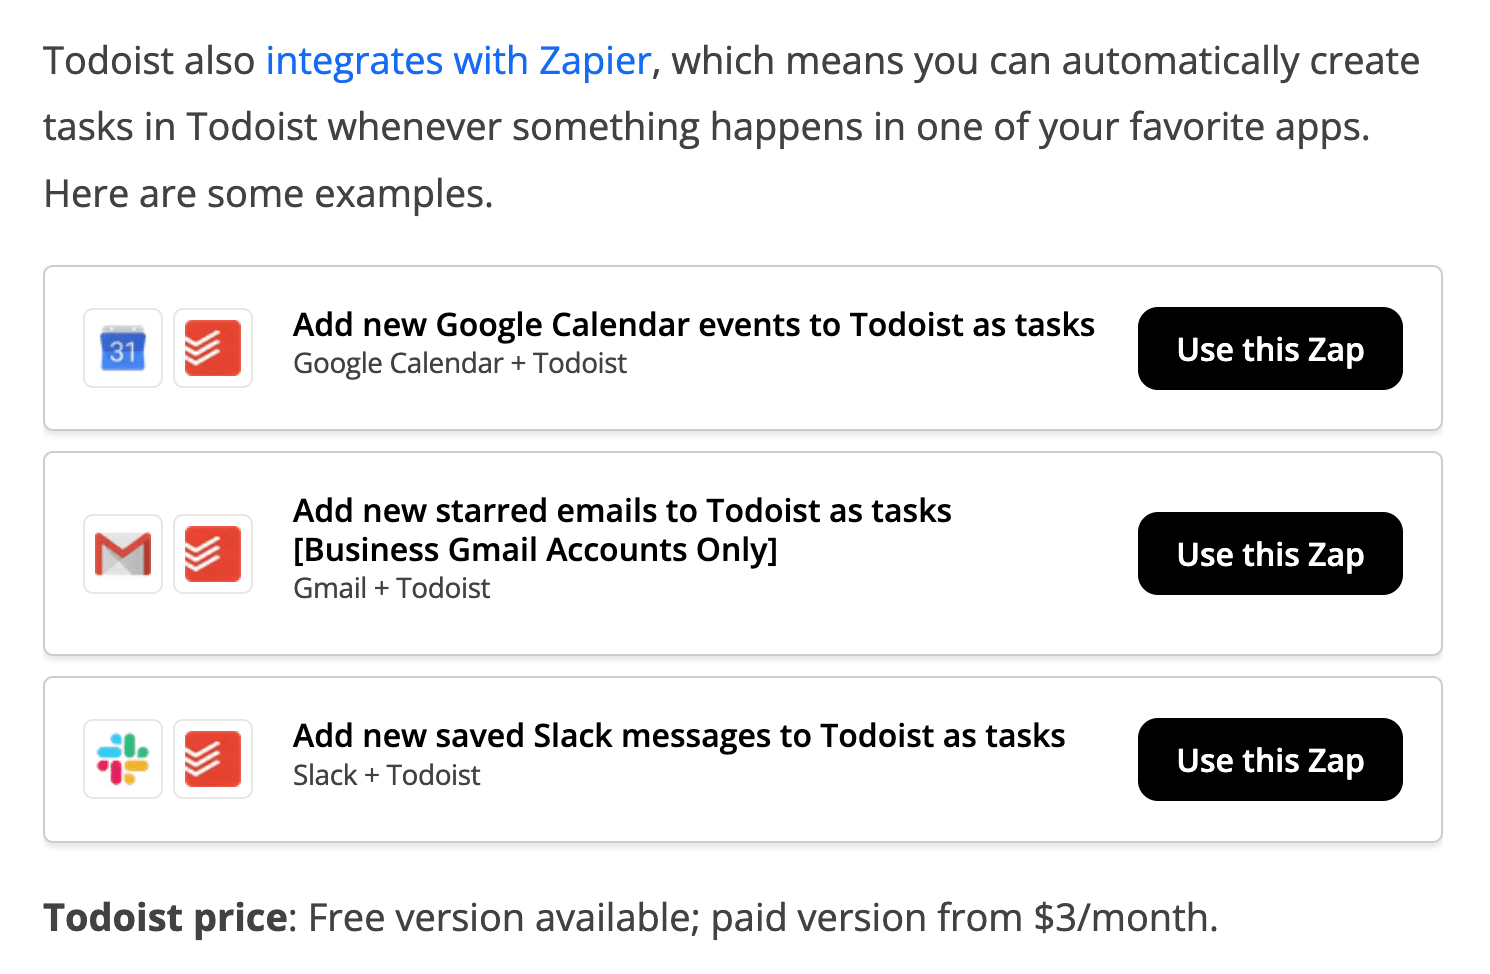 Example of product-led marketing from Zapier.